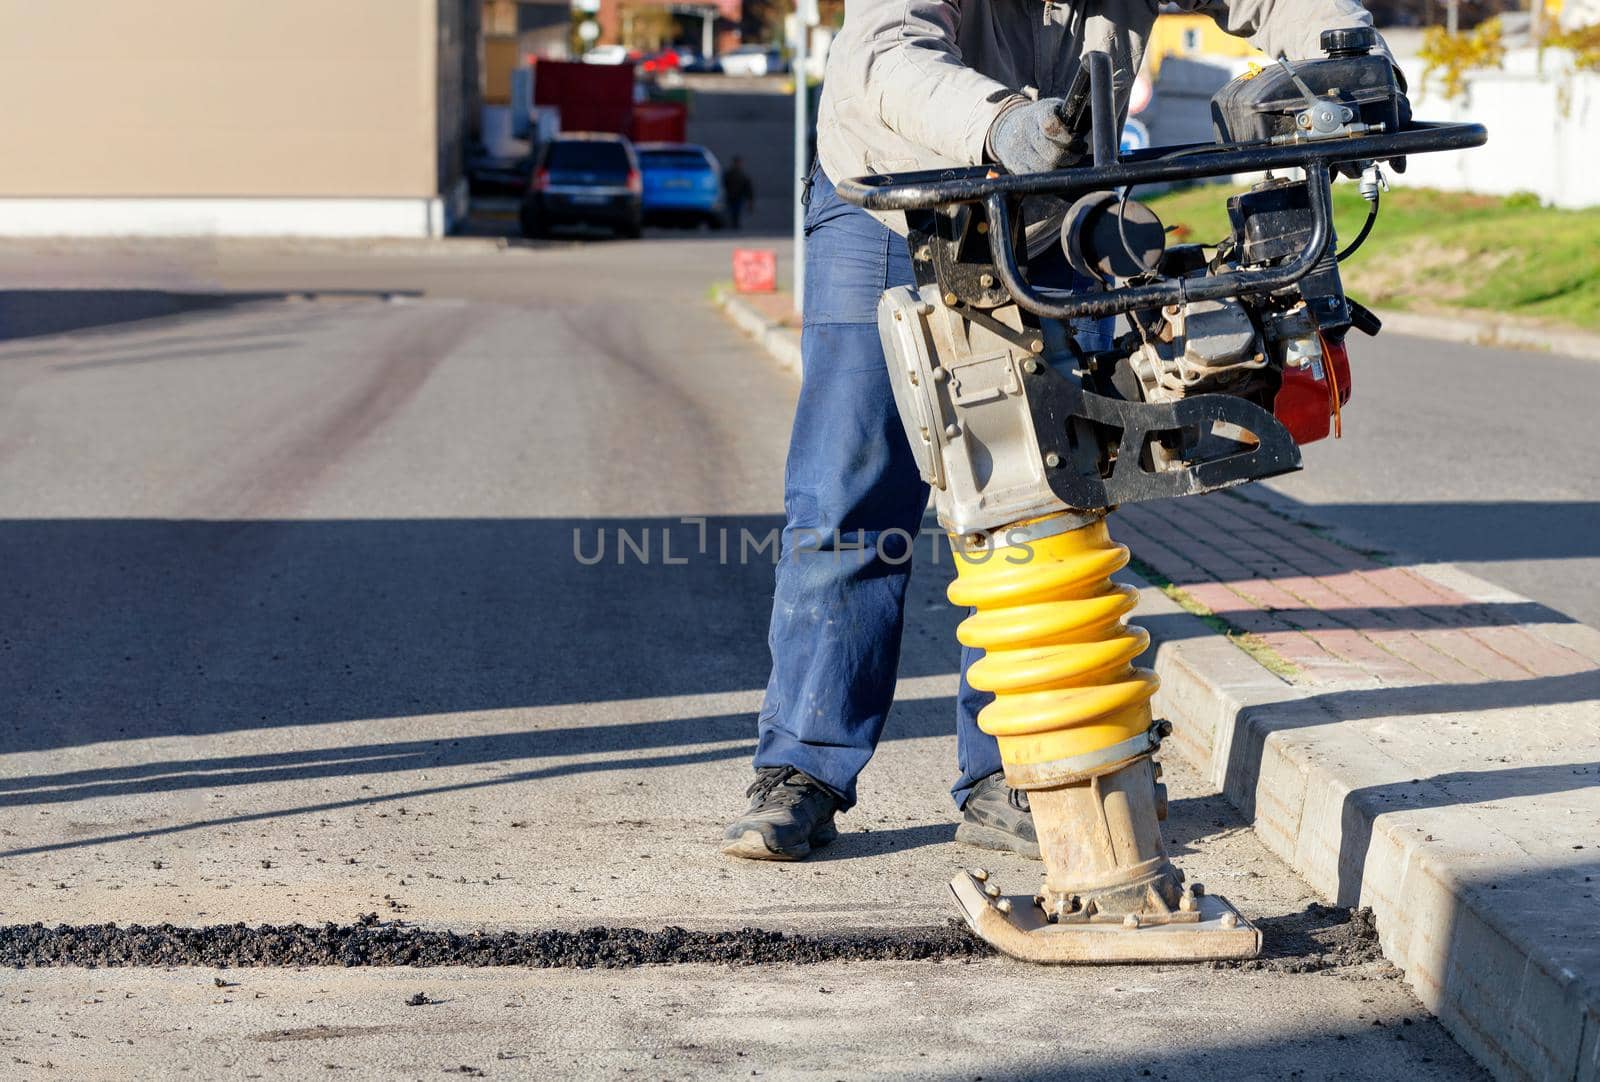 A road worker uses a portable petrol vibration rammer to repair asphalt on the driveway on a bright sunny day.